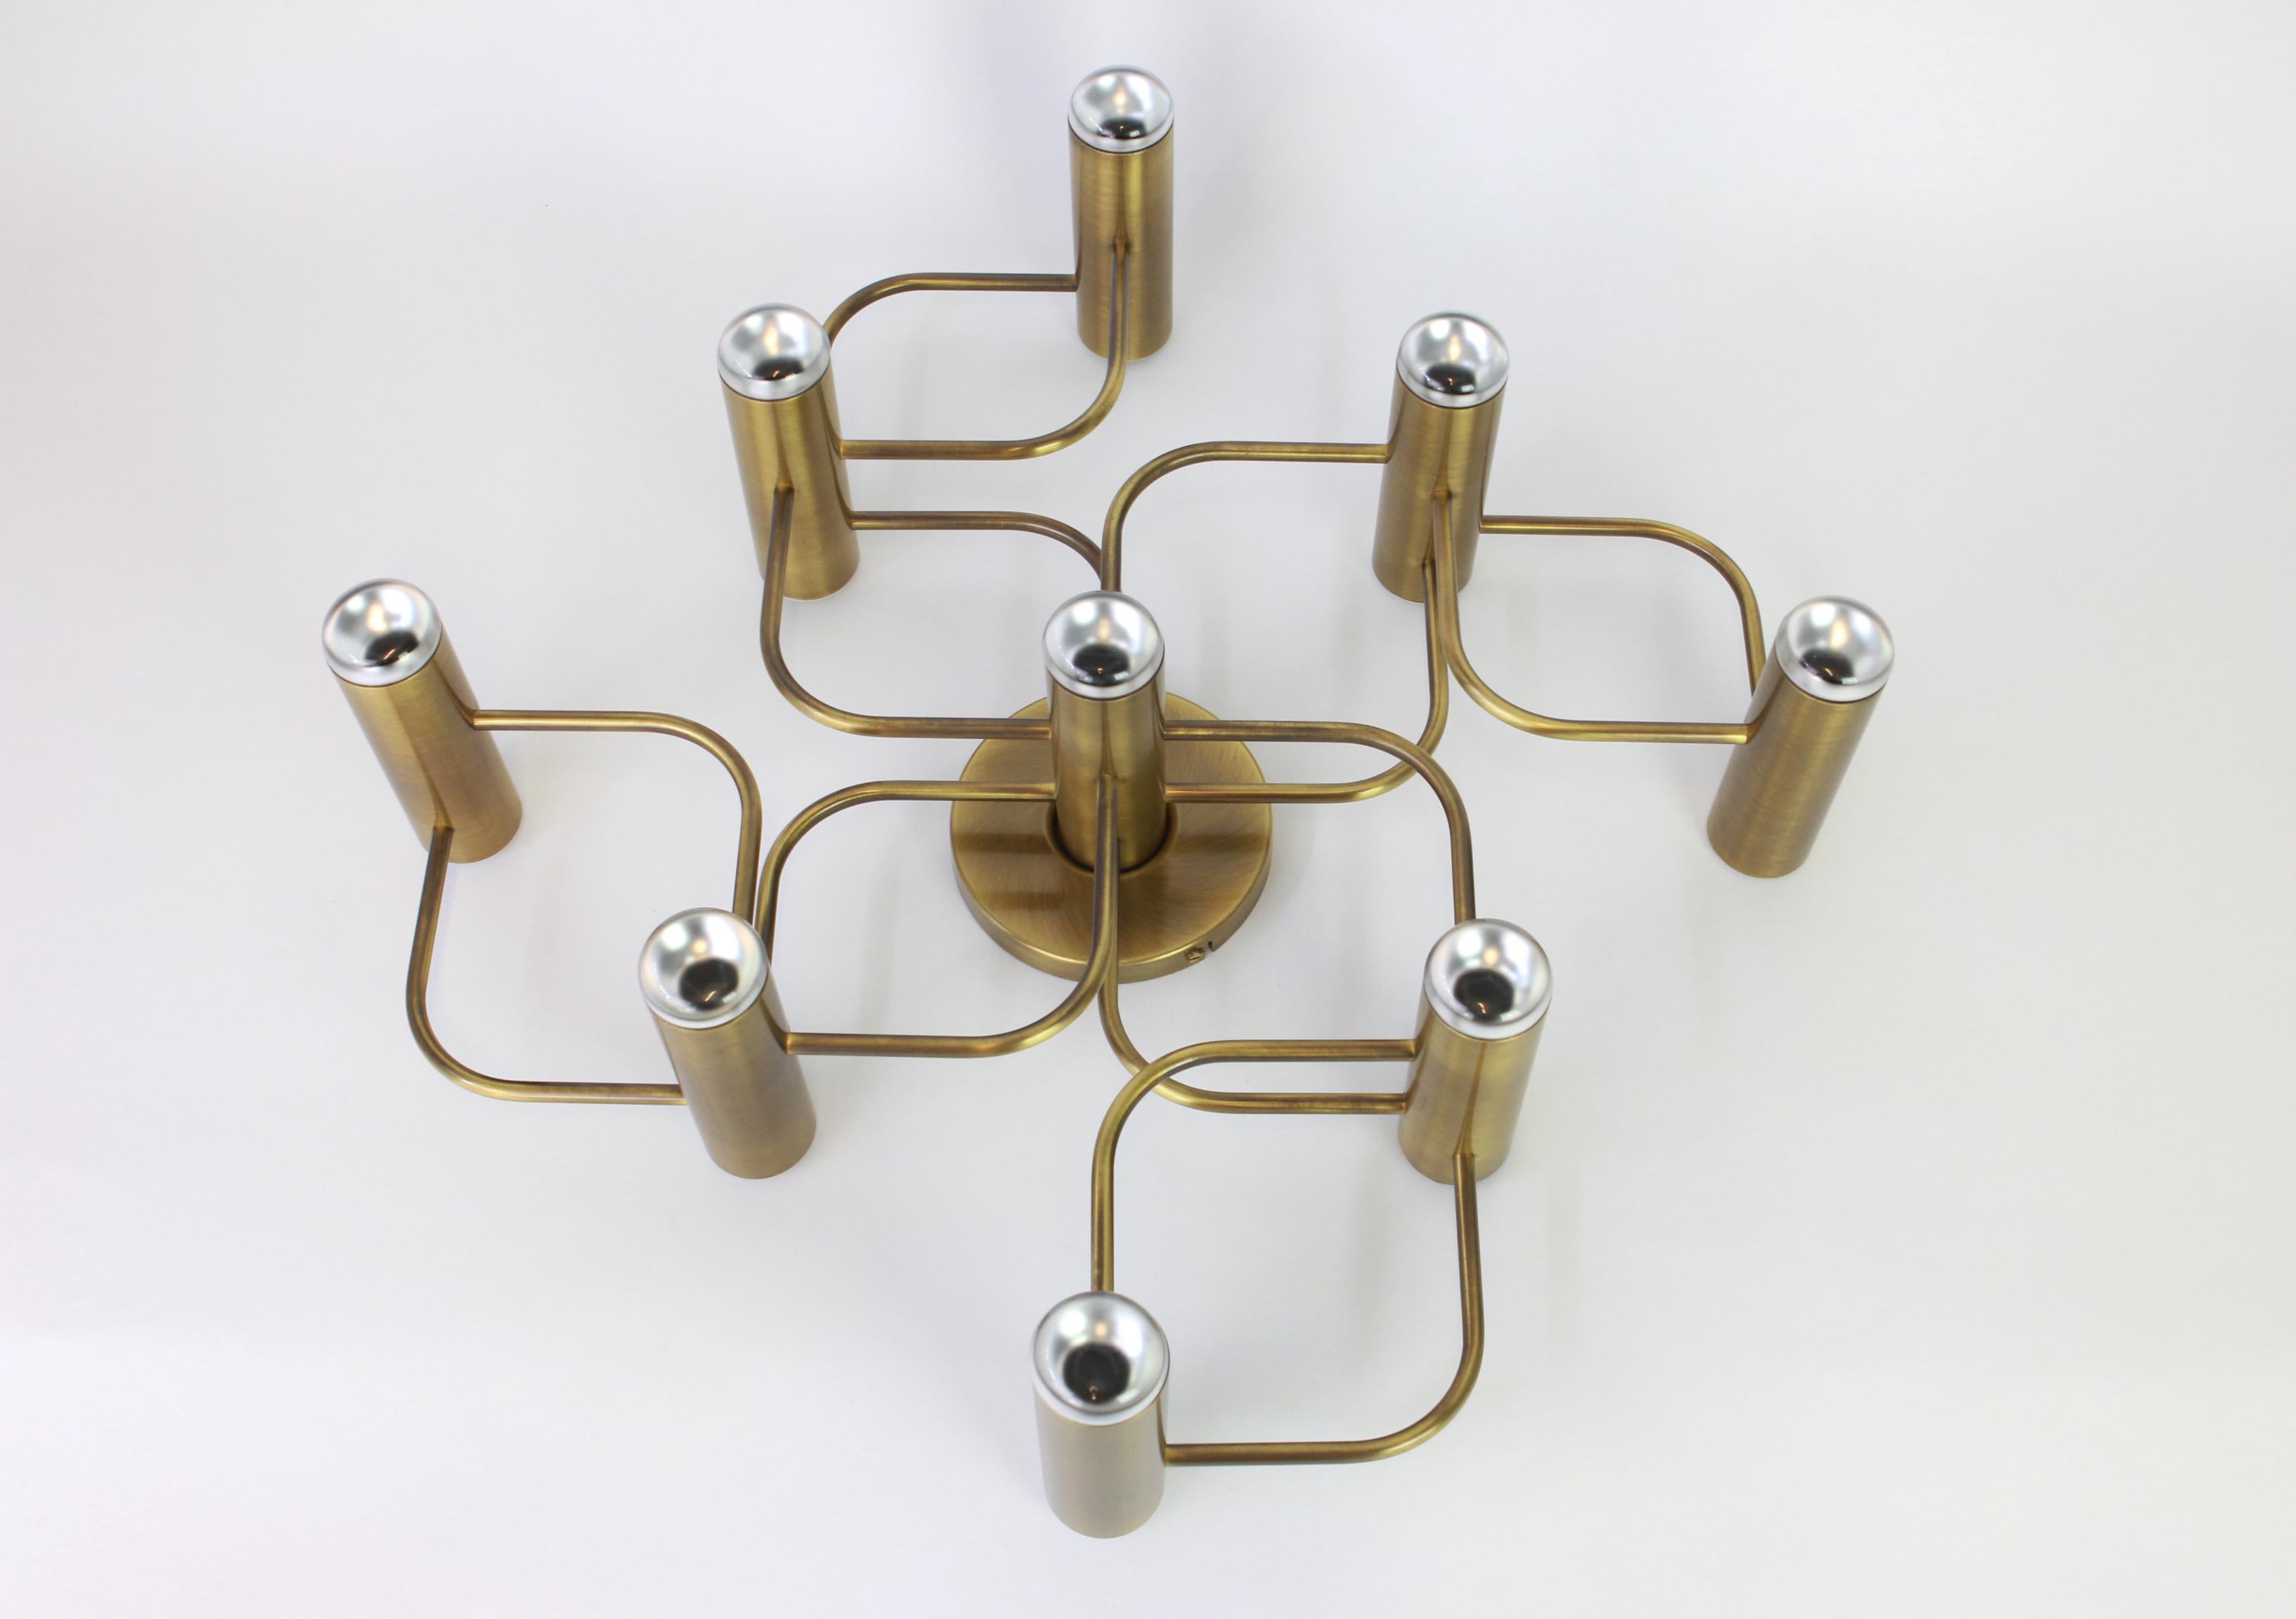 Stunning nine-light flush mount light fixture in dark brass. Can be used as wall or ceiling light.
Design: Sciolari
Sockets: 9 x E14 small bulbs - max 40 watt each
Light bulbs are not included. It is possible to install this fixture in all